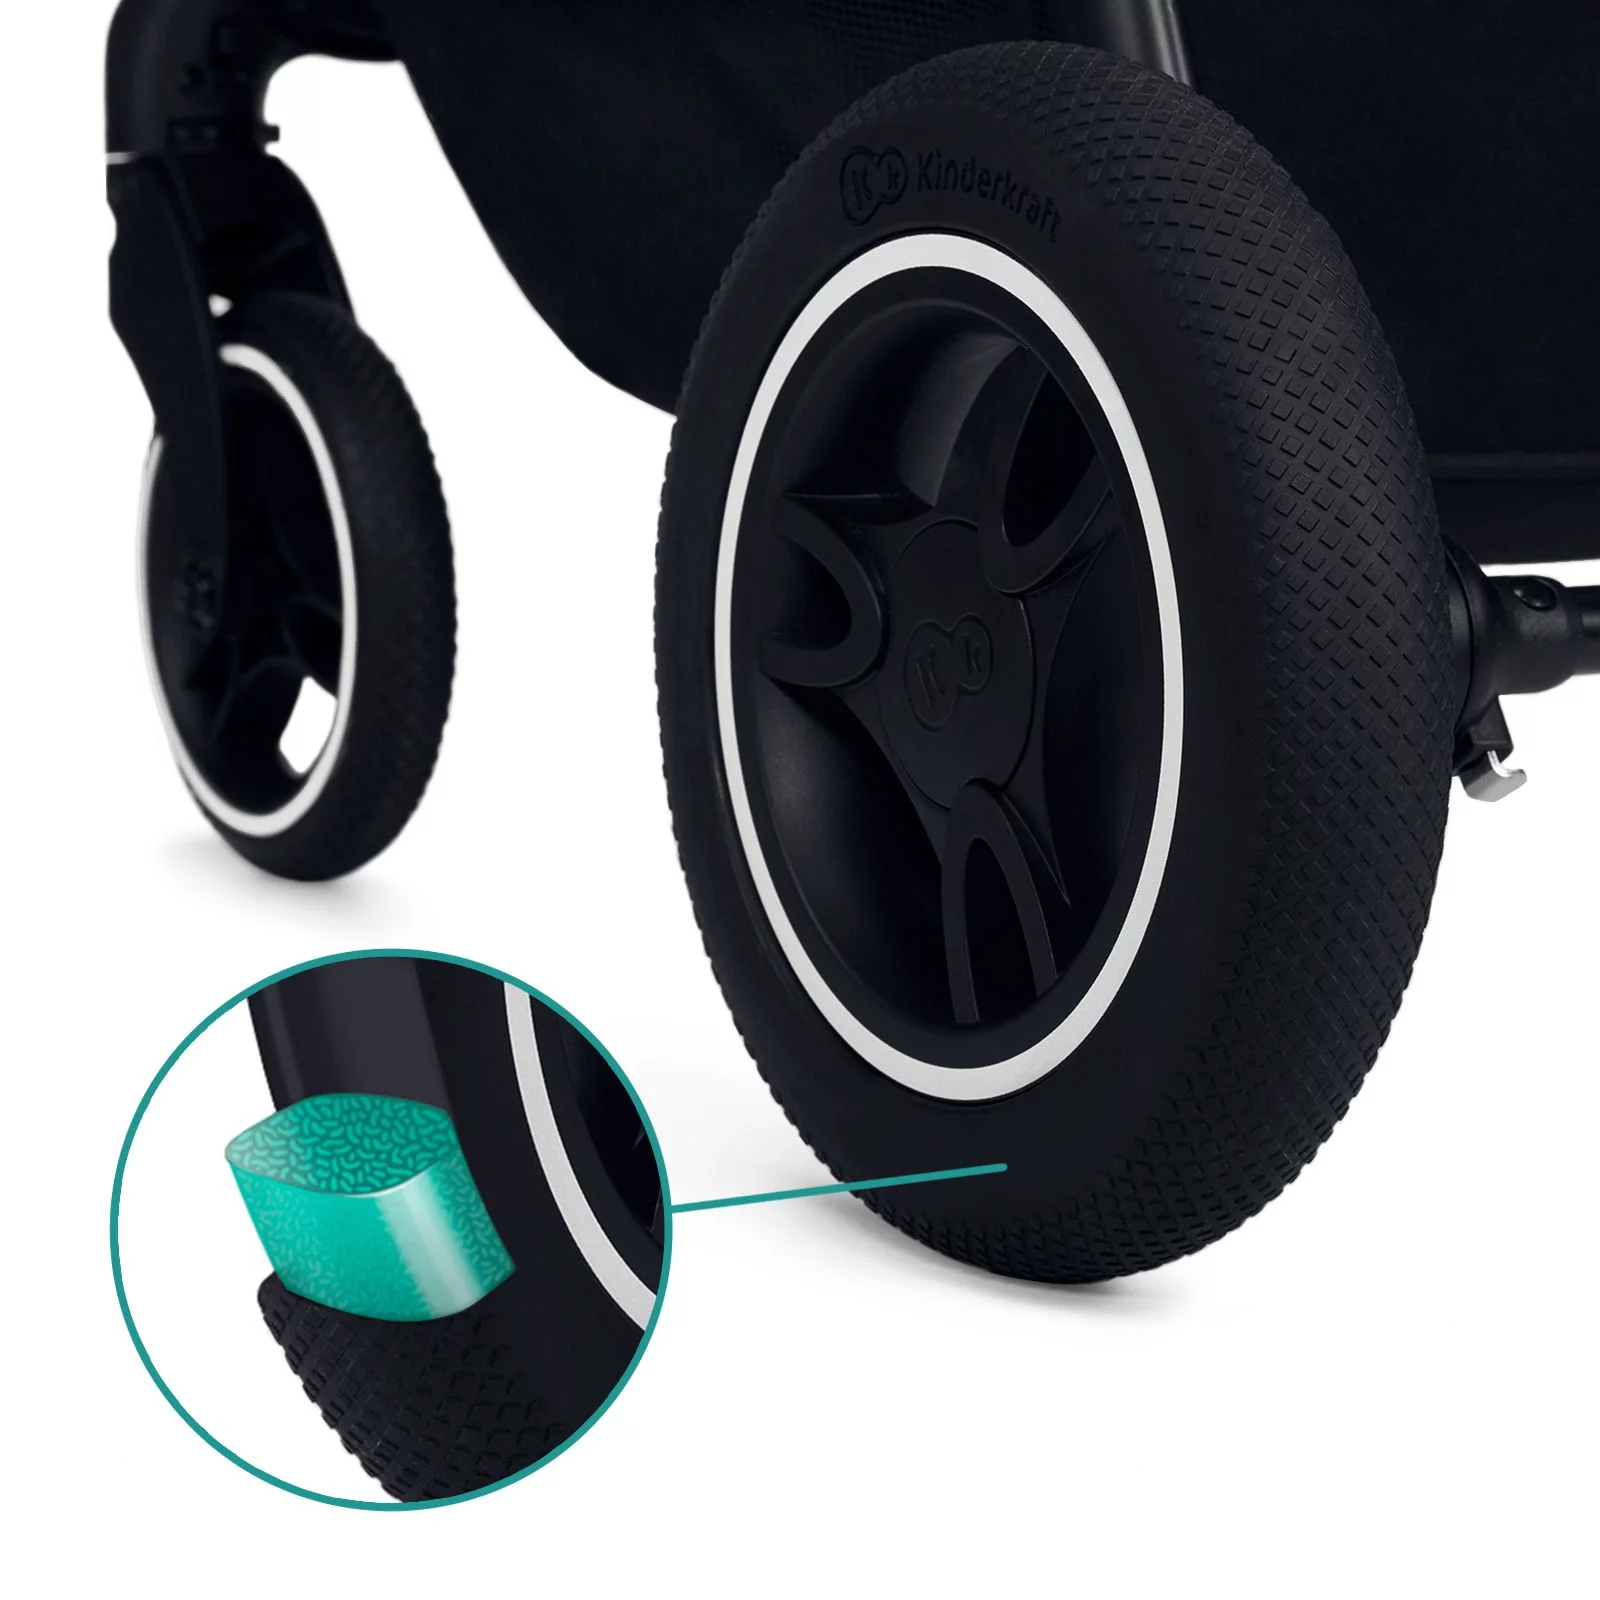 Puncture-resistant tyres